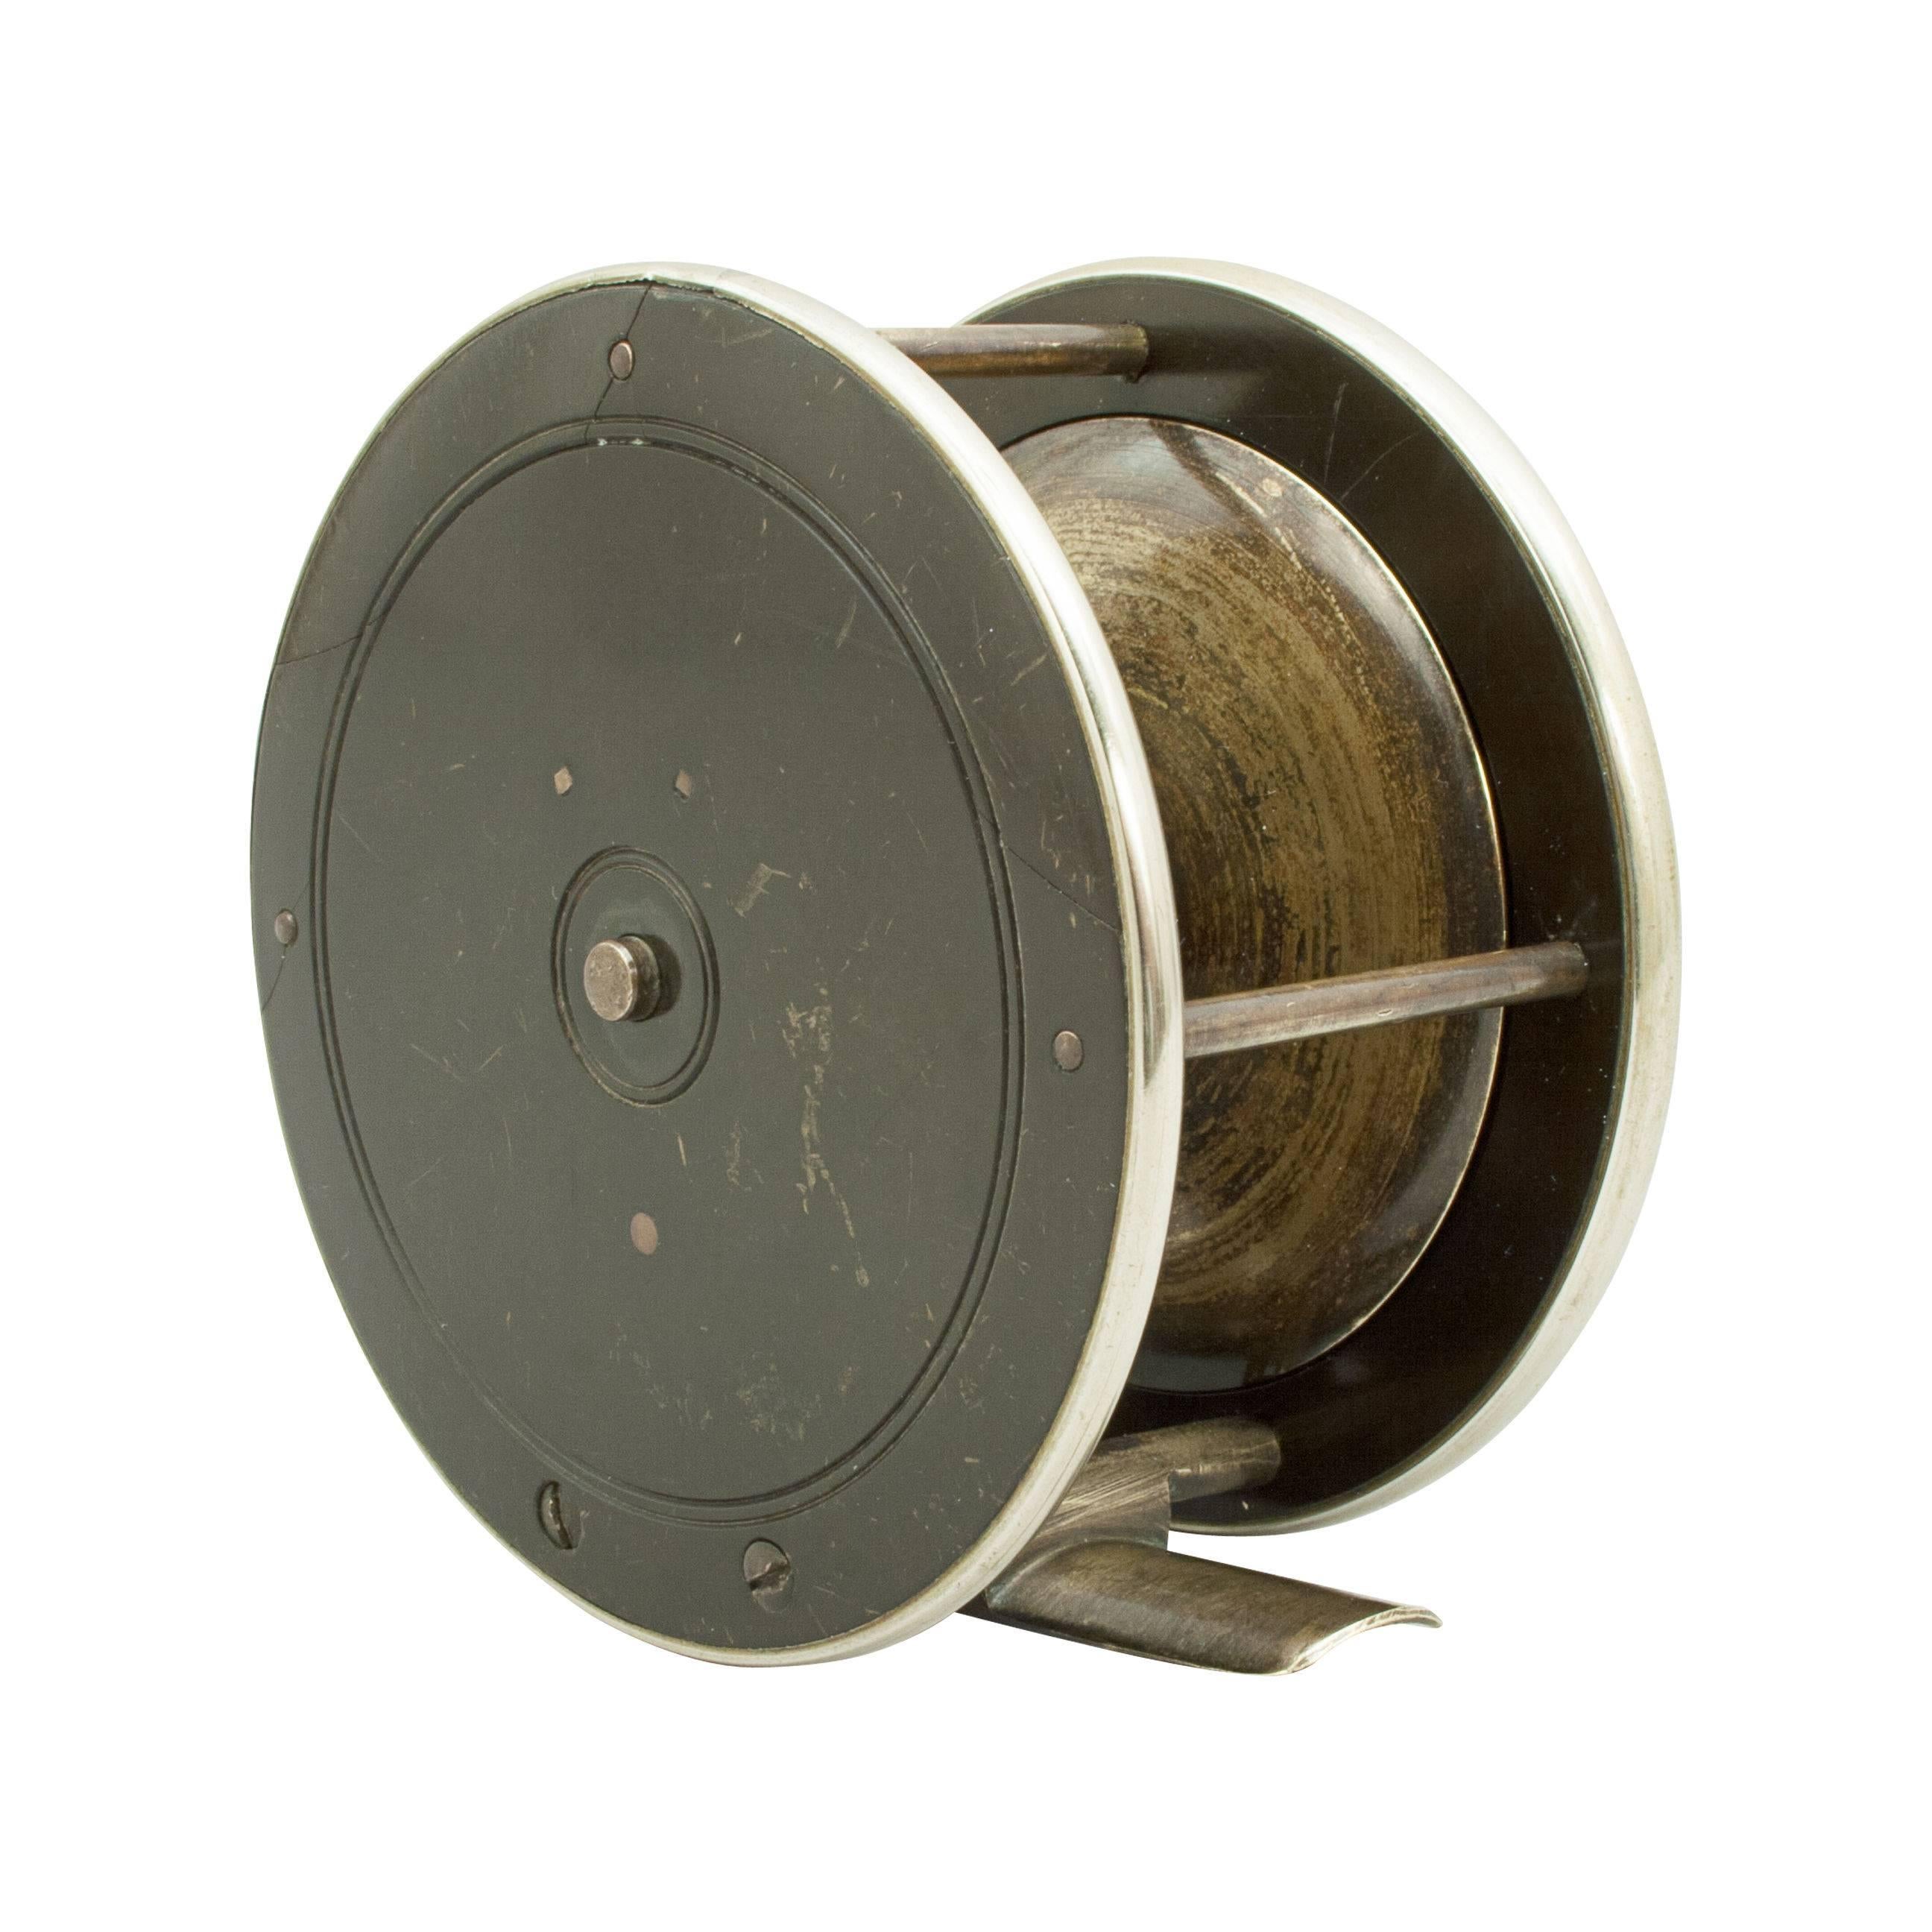 Brass sea trout fly fishing reel with check mechanism by Heabter, Plymouth. 
The reel stamped with the makers name on the face plate. The handle made from wood, probably walnut and the outer rims are nickel plate.